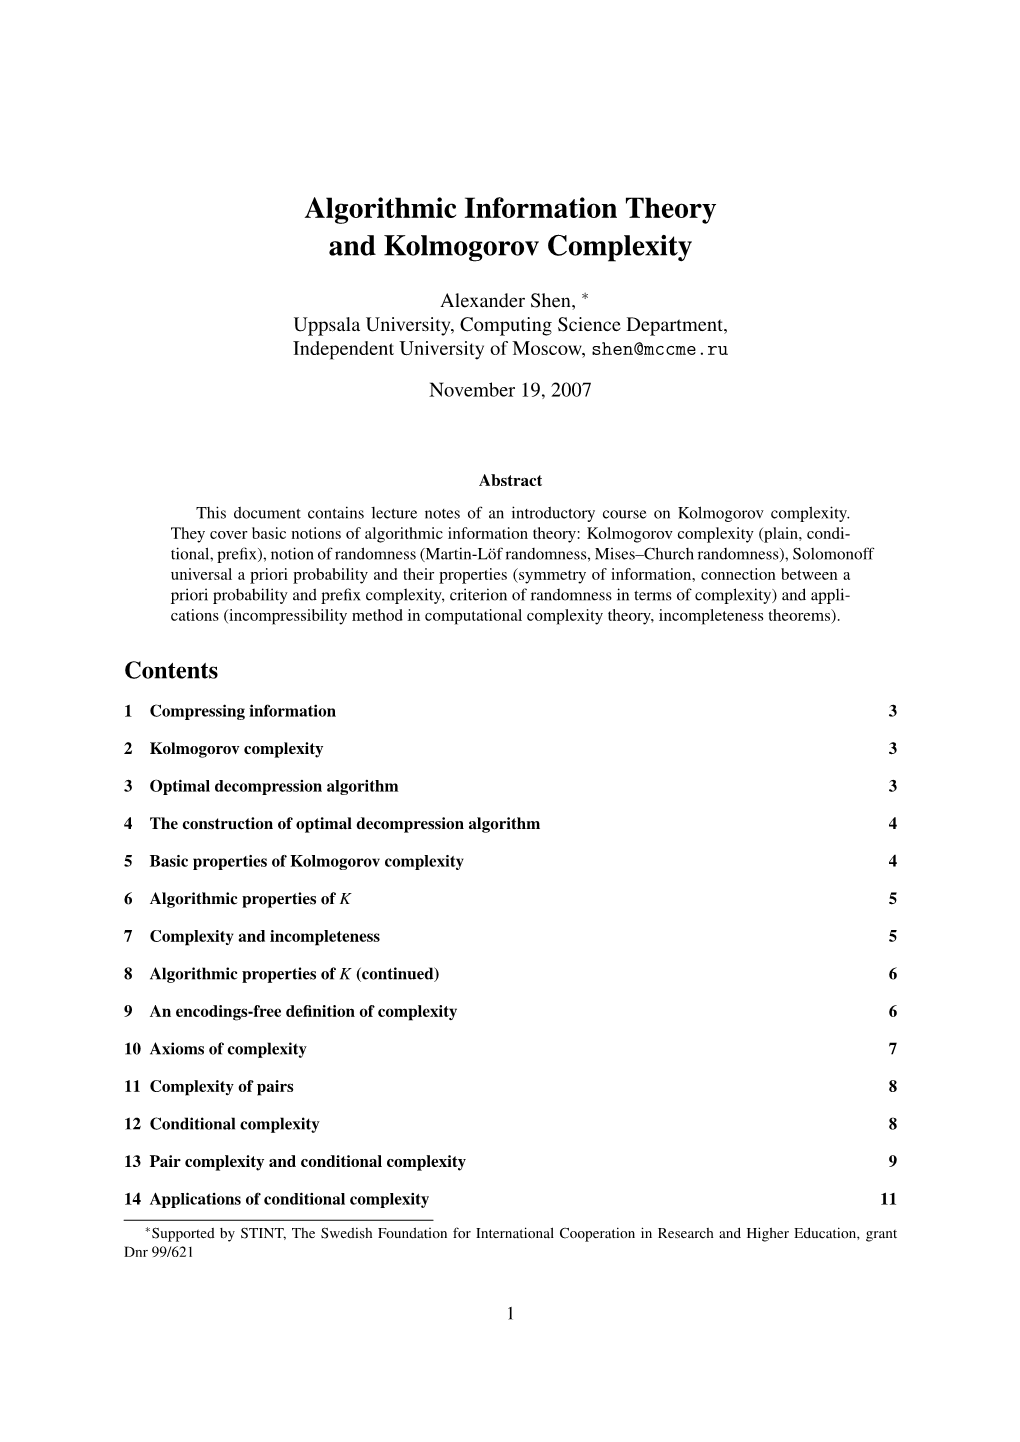 Algorithmic Information Theory and Kolmogorov Complexity